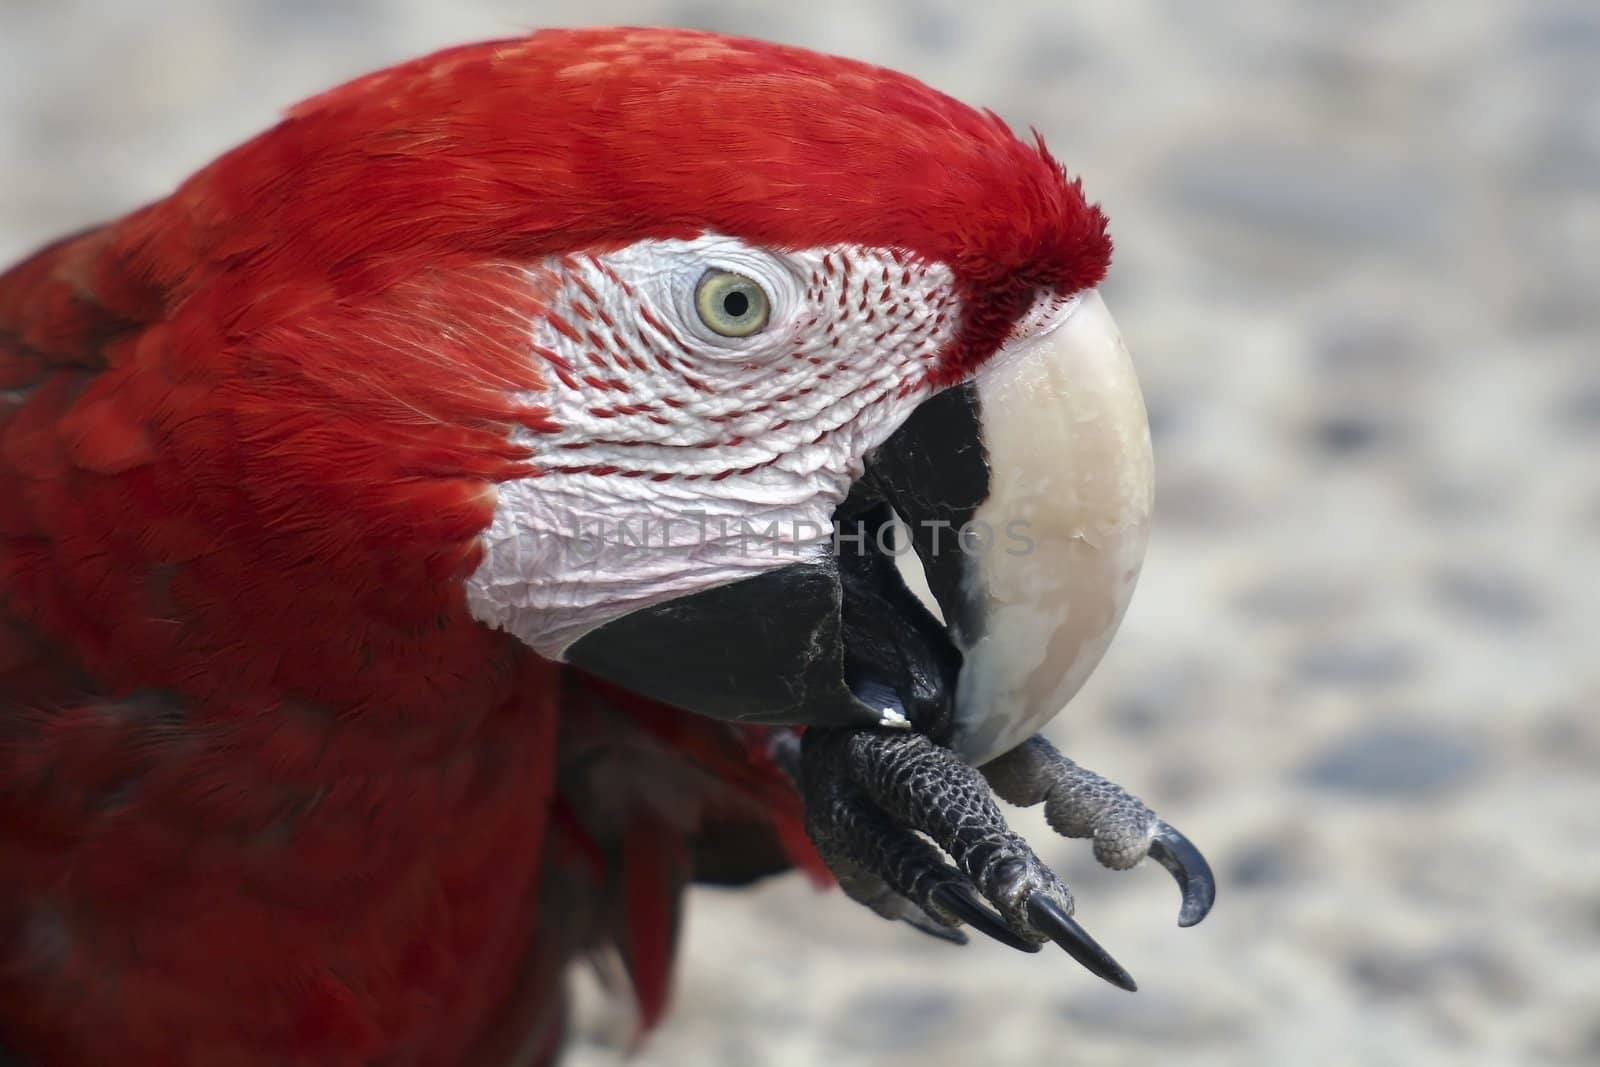 Portrait of a red Macaw